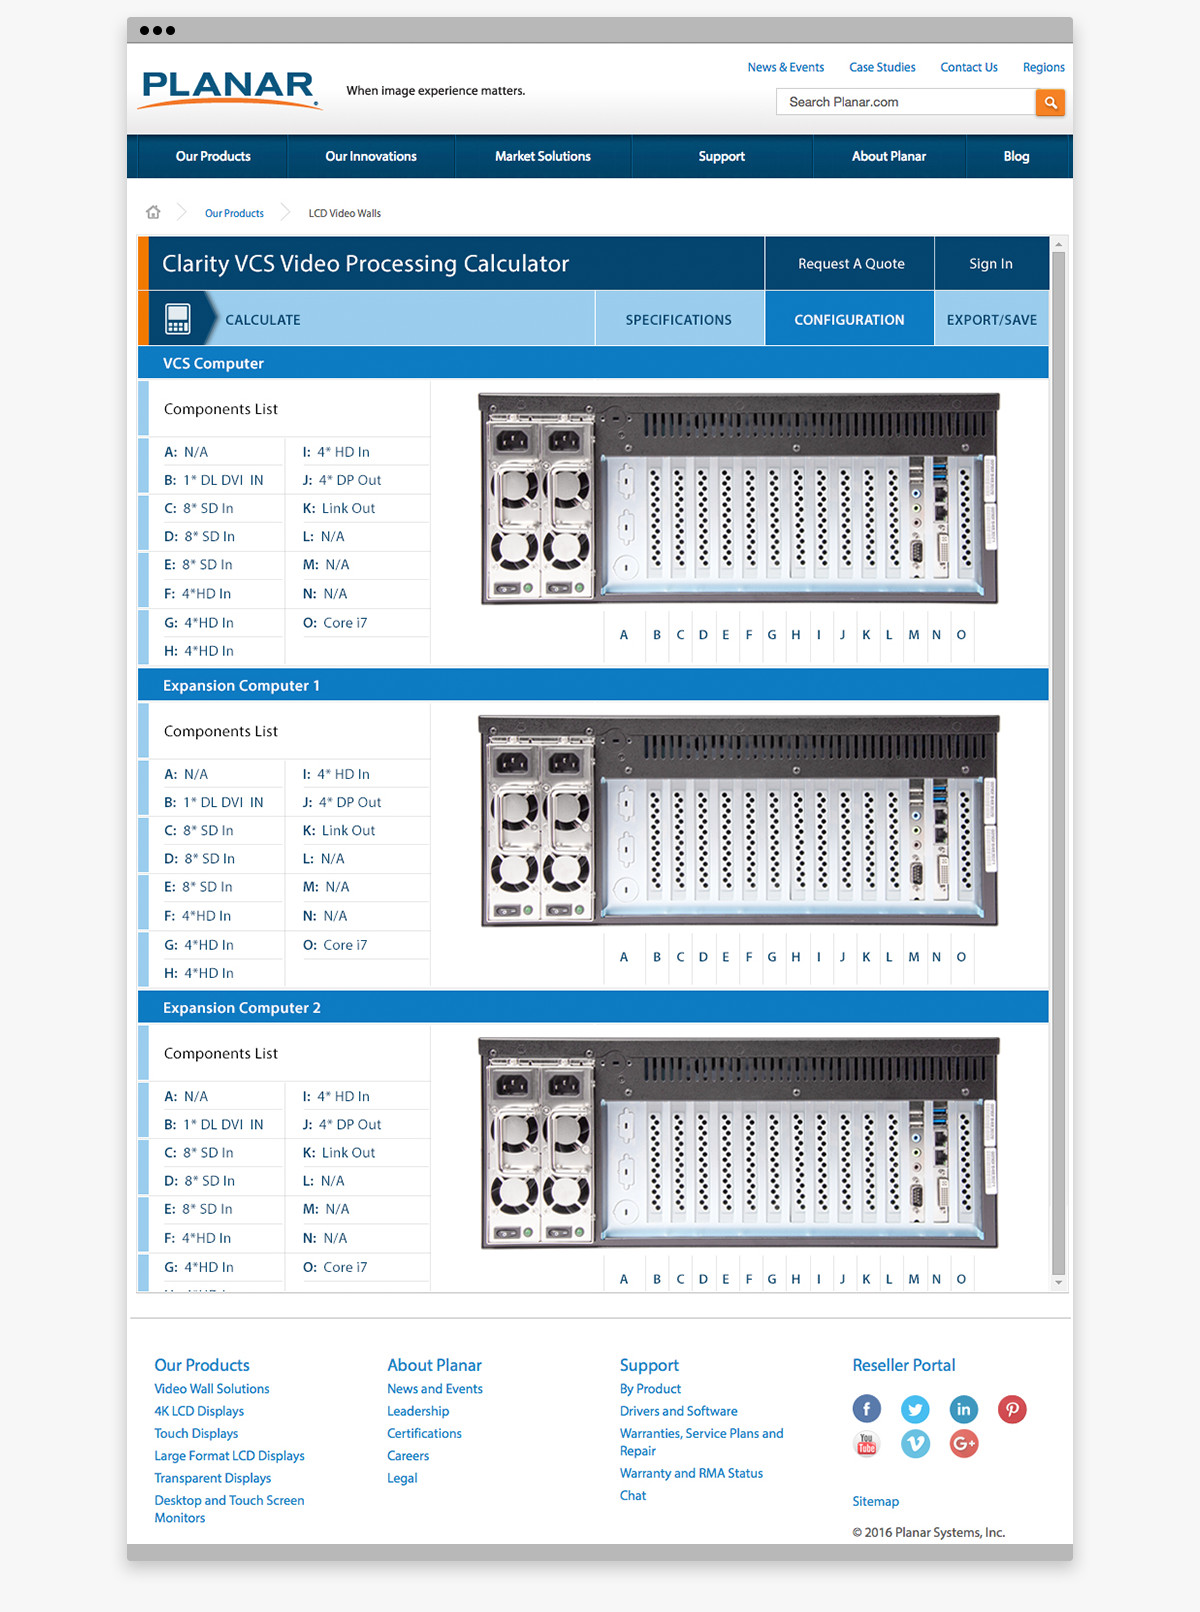 Configuration page of Planar's Clarity VCS Calculator